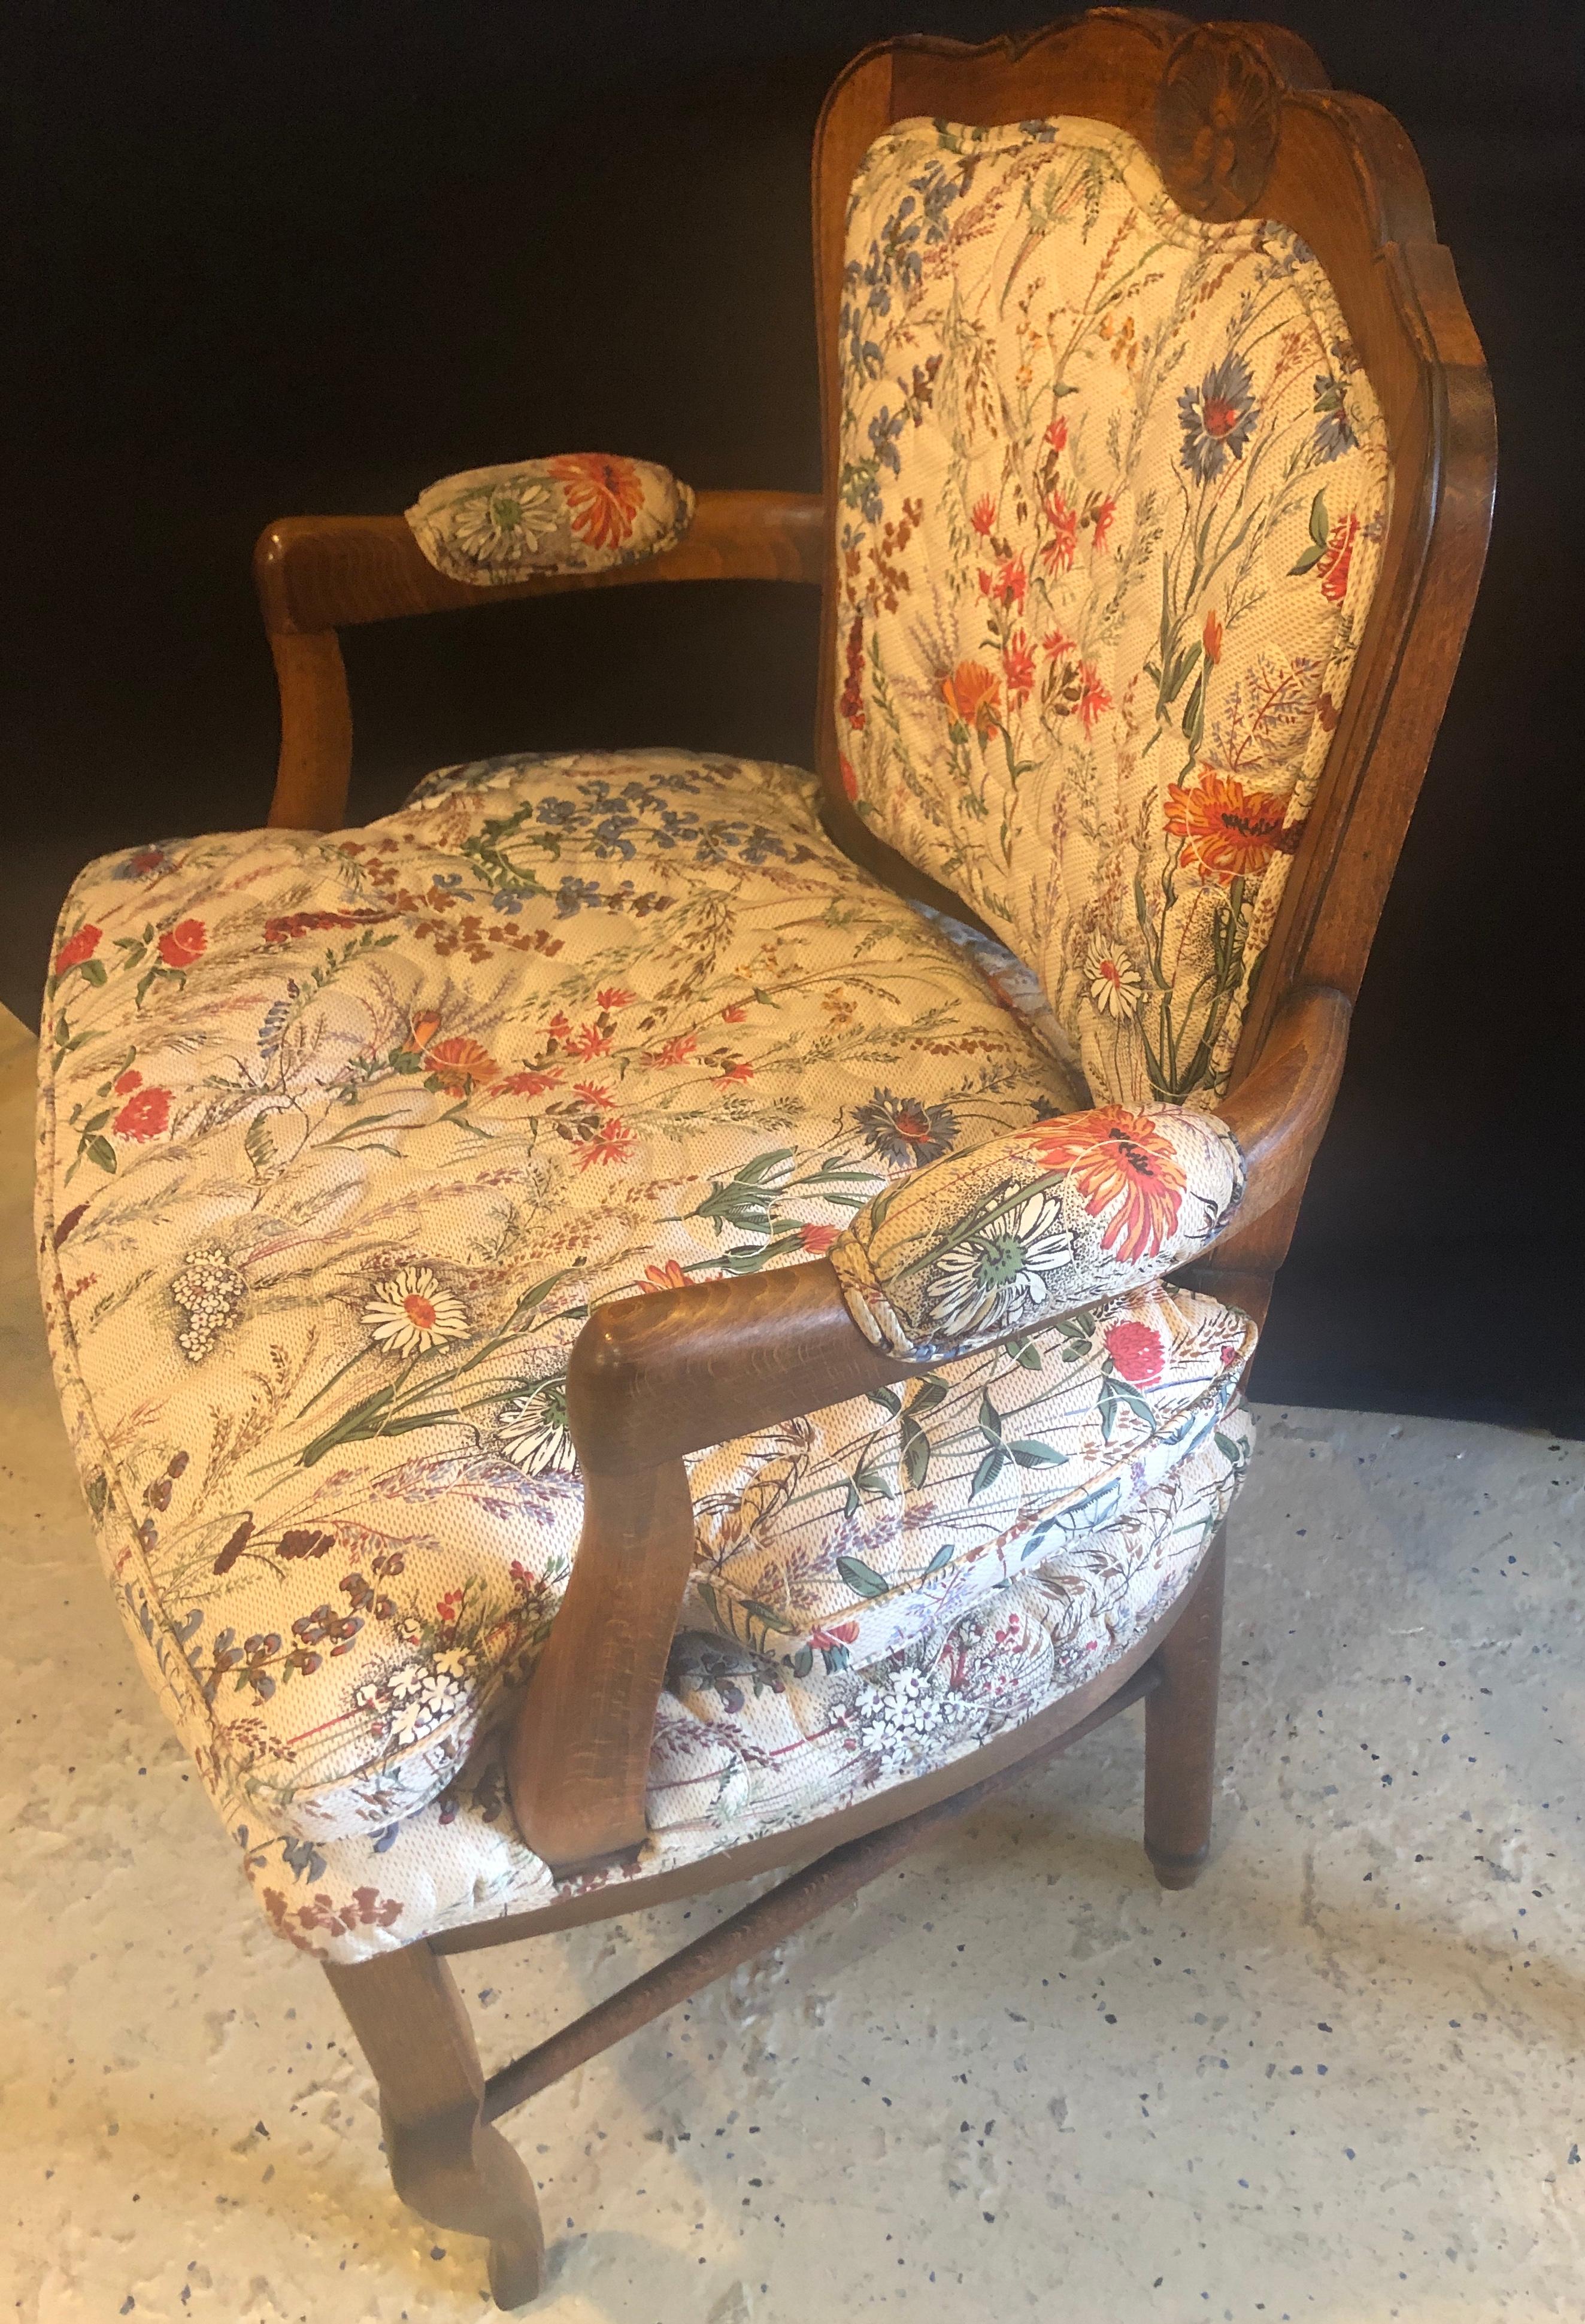 20th Century Country French Boudoir Fauteuil Louis XV Chairs in Quilted like Upholstery, pair